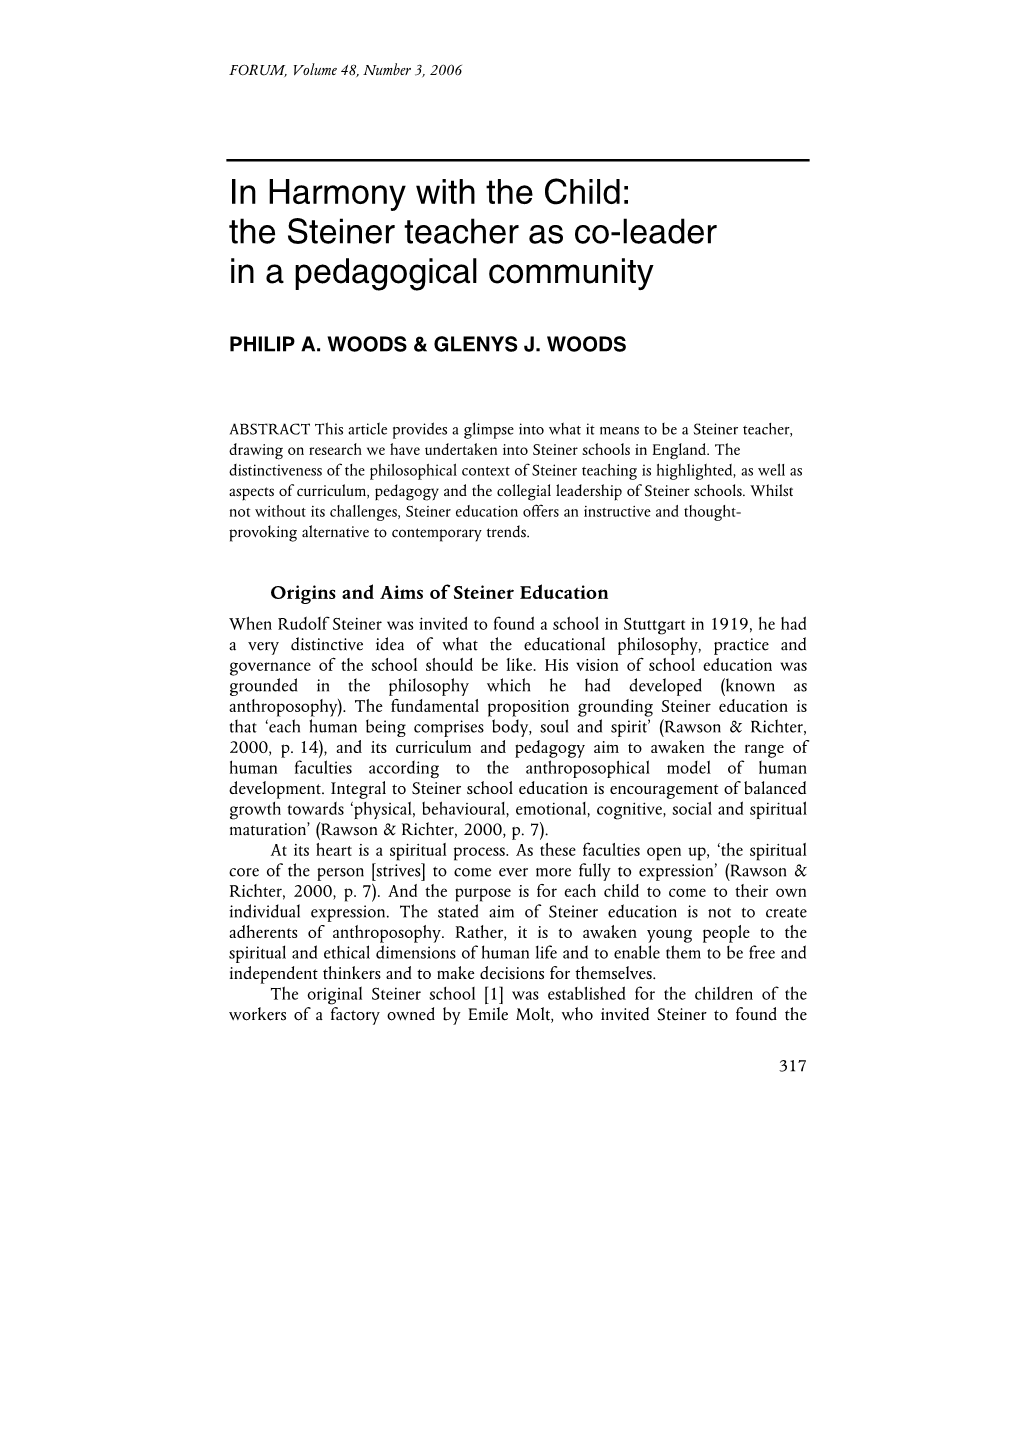 The Steiner Teacher As Co-Leader in a Pedagogical Community